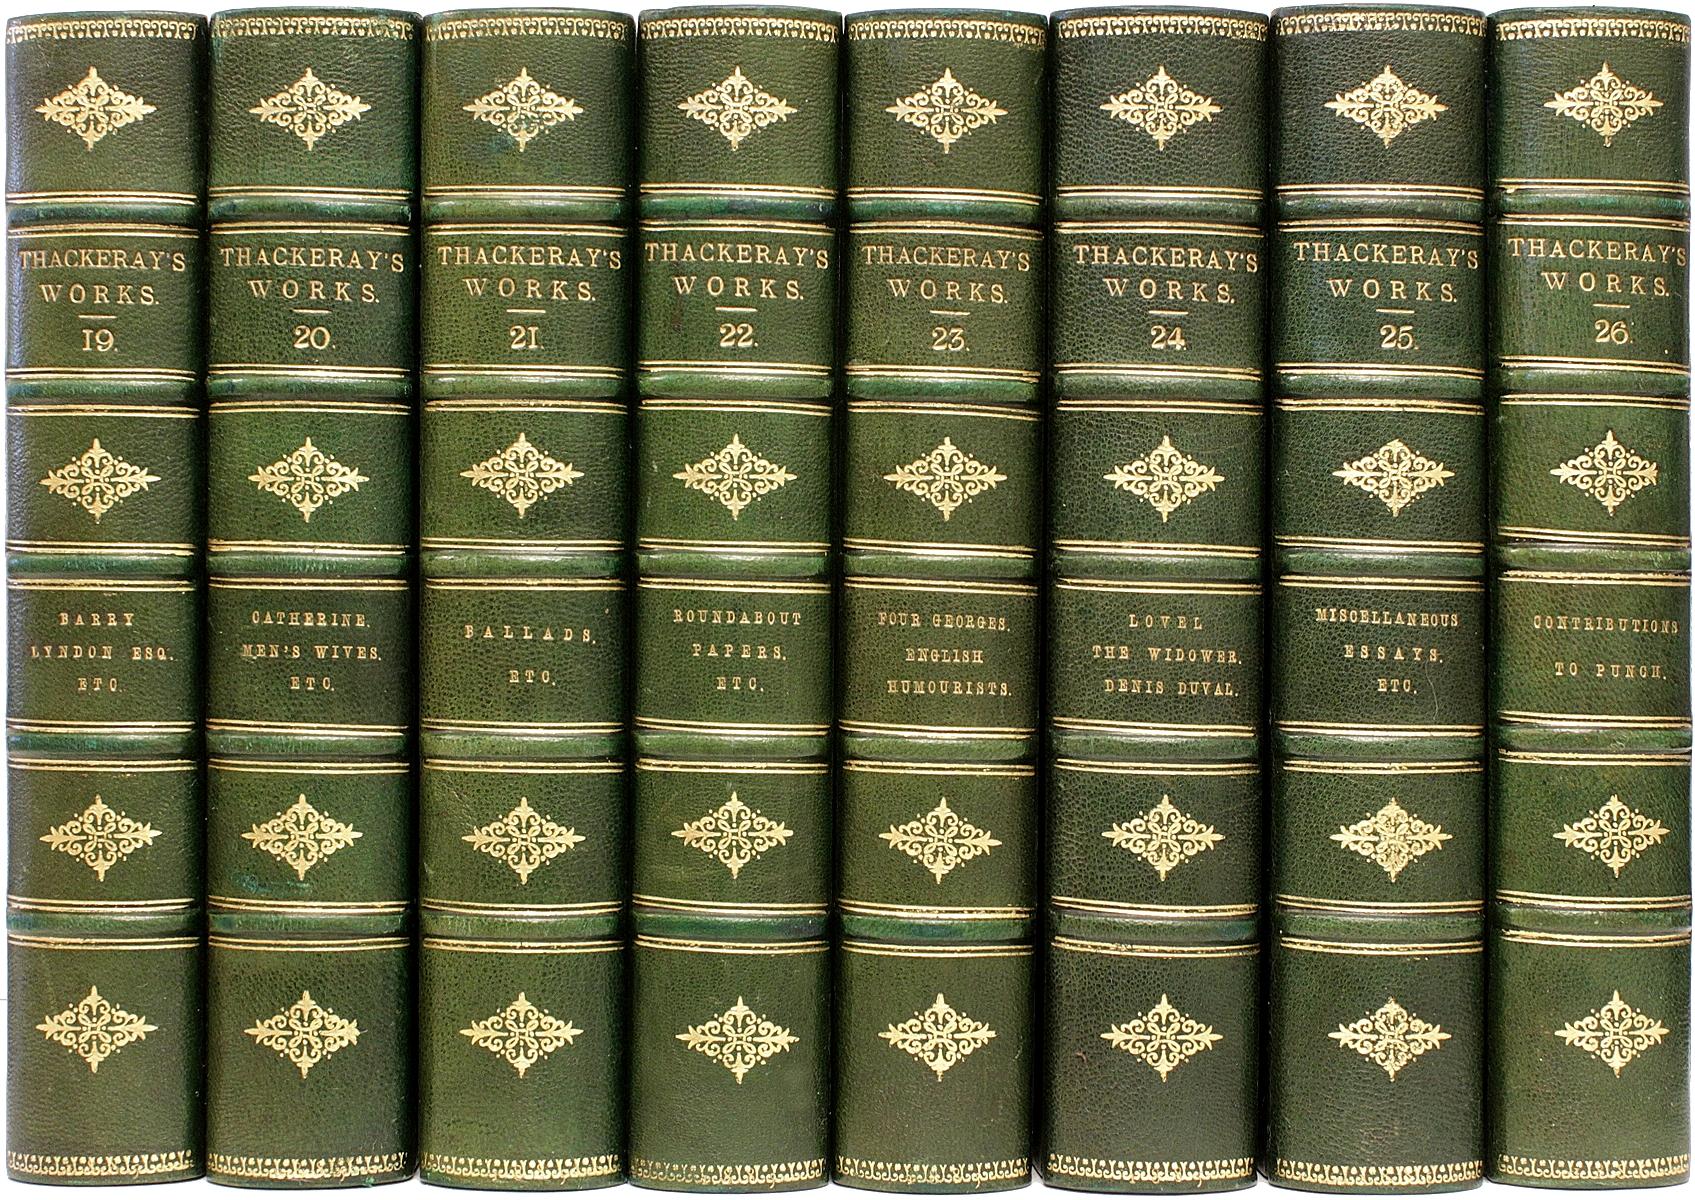 Complete Works of William Thackeray, 26 Vols, in a Fine Leather Binding 2